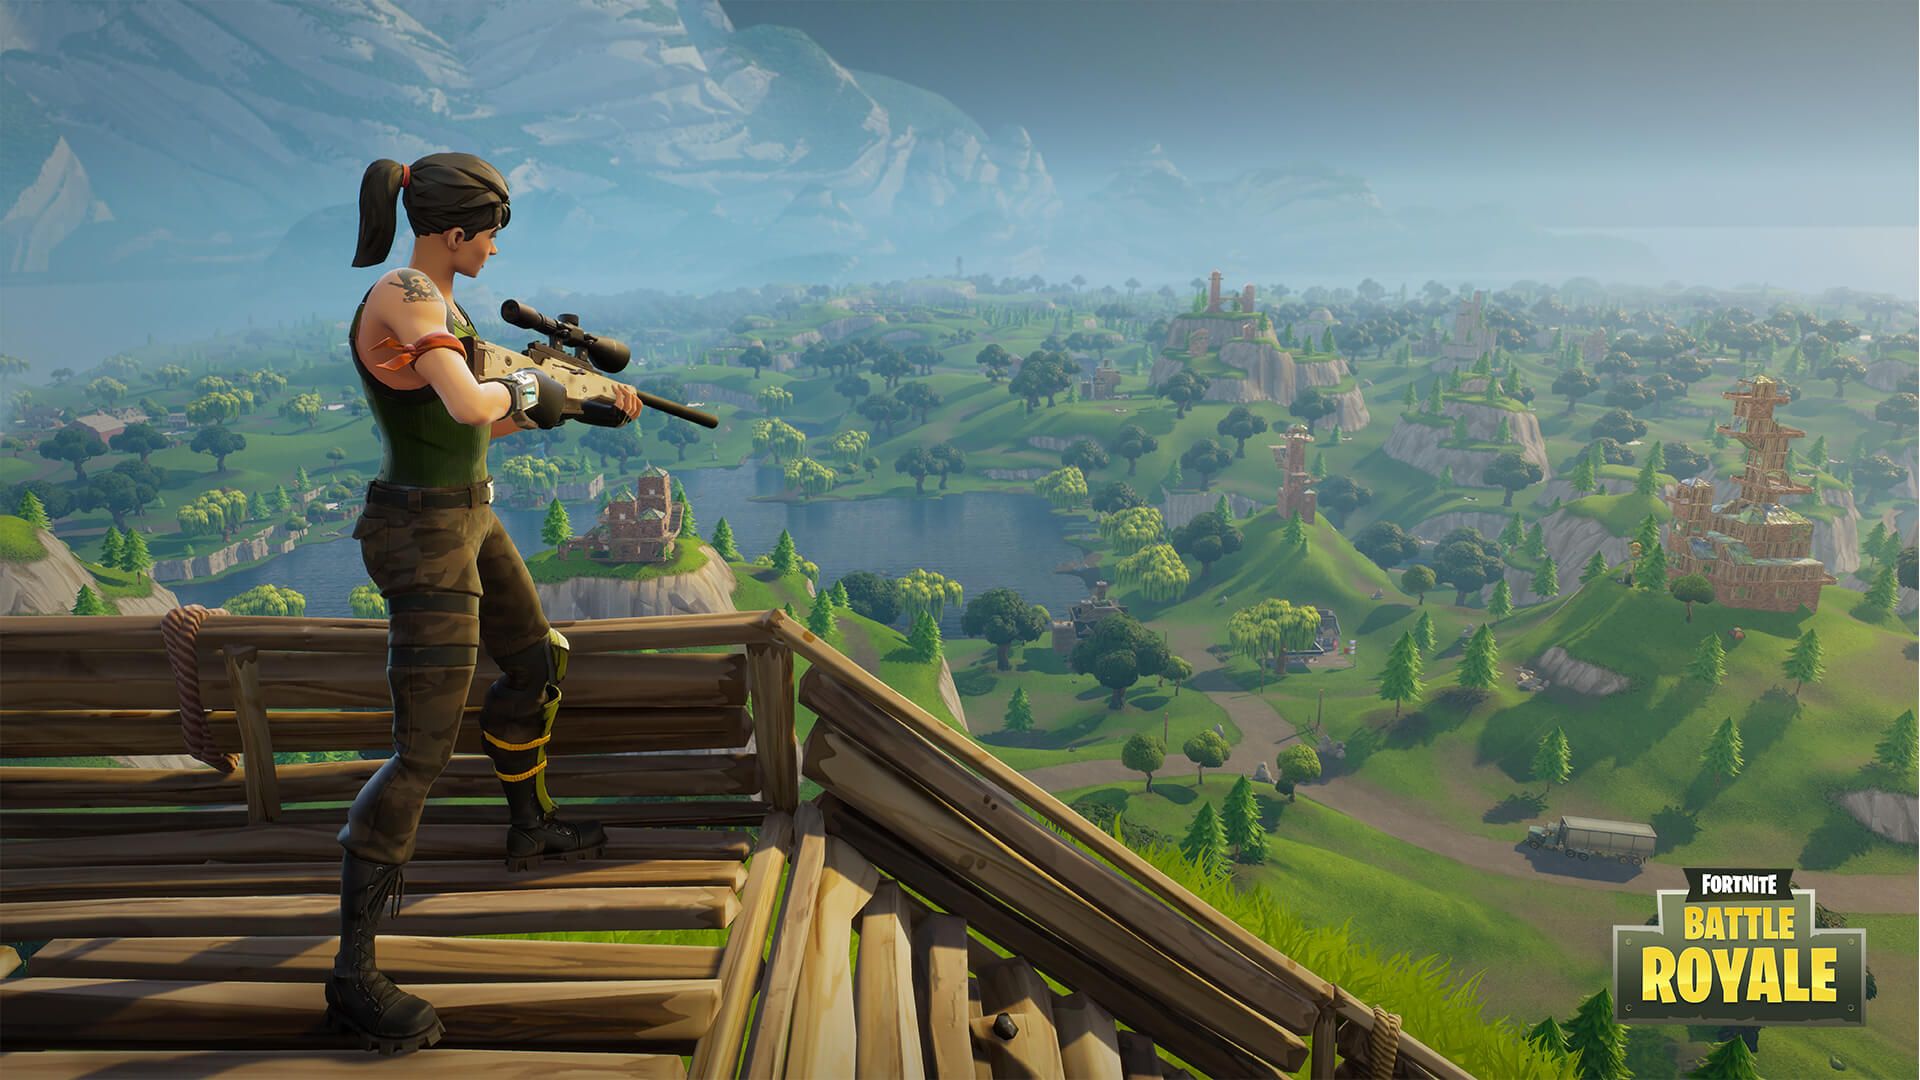 Check out 8 New Fortnite Wallpapers Full HD and 4K